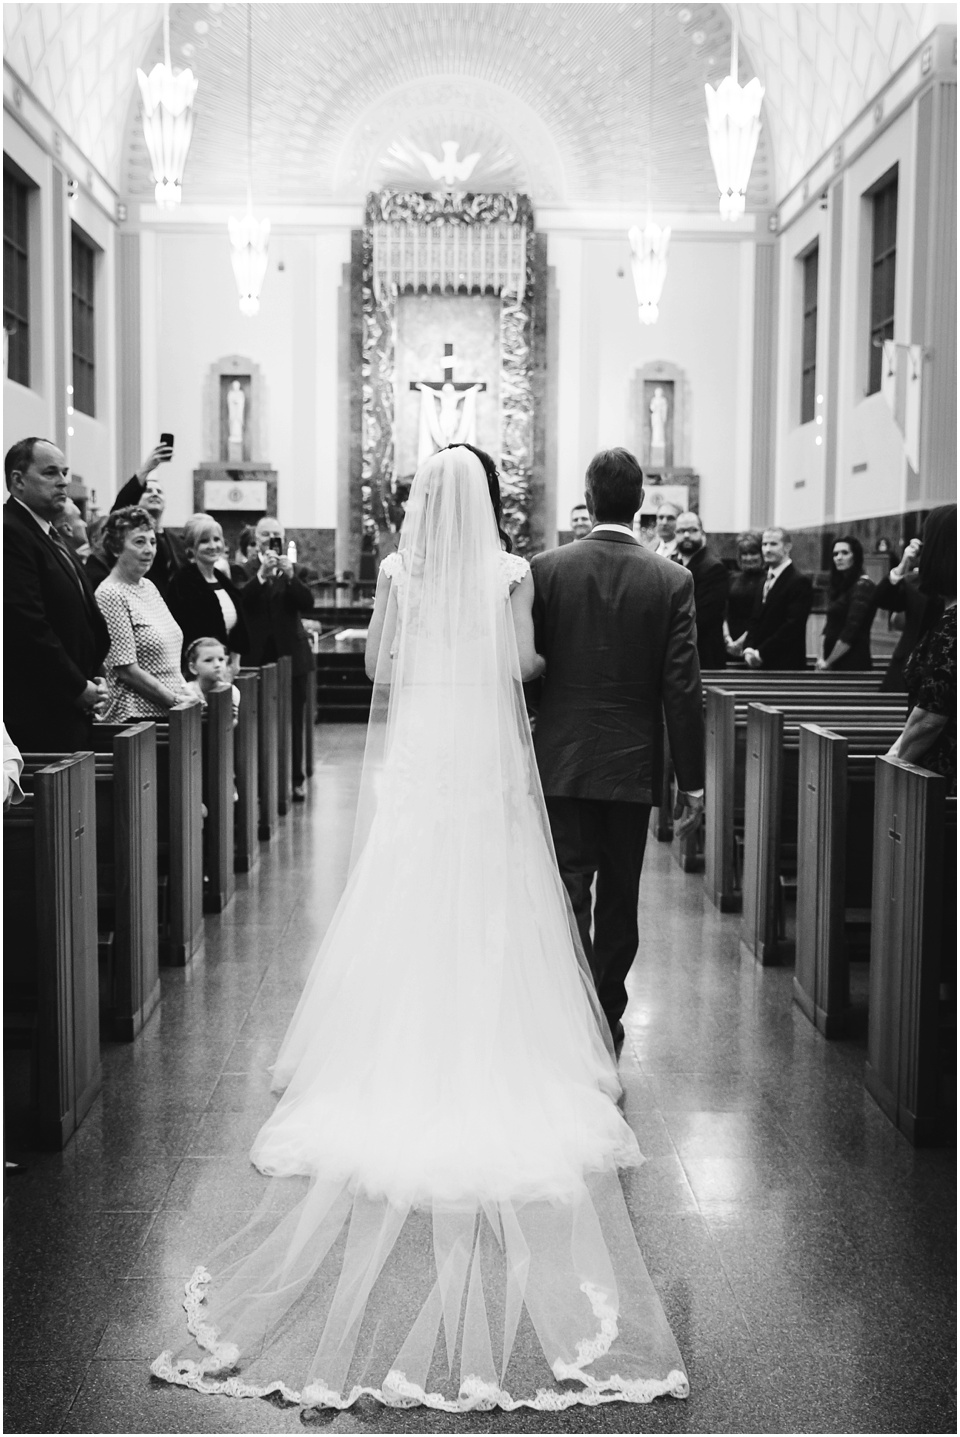 cathedral wedding photography, Bride walking down the aisle during church wedding.